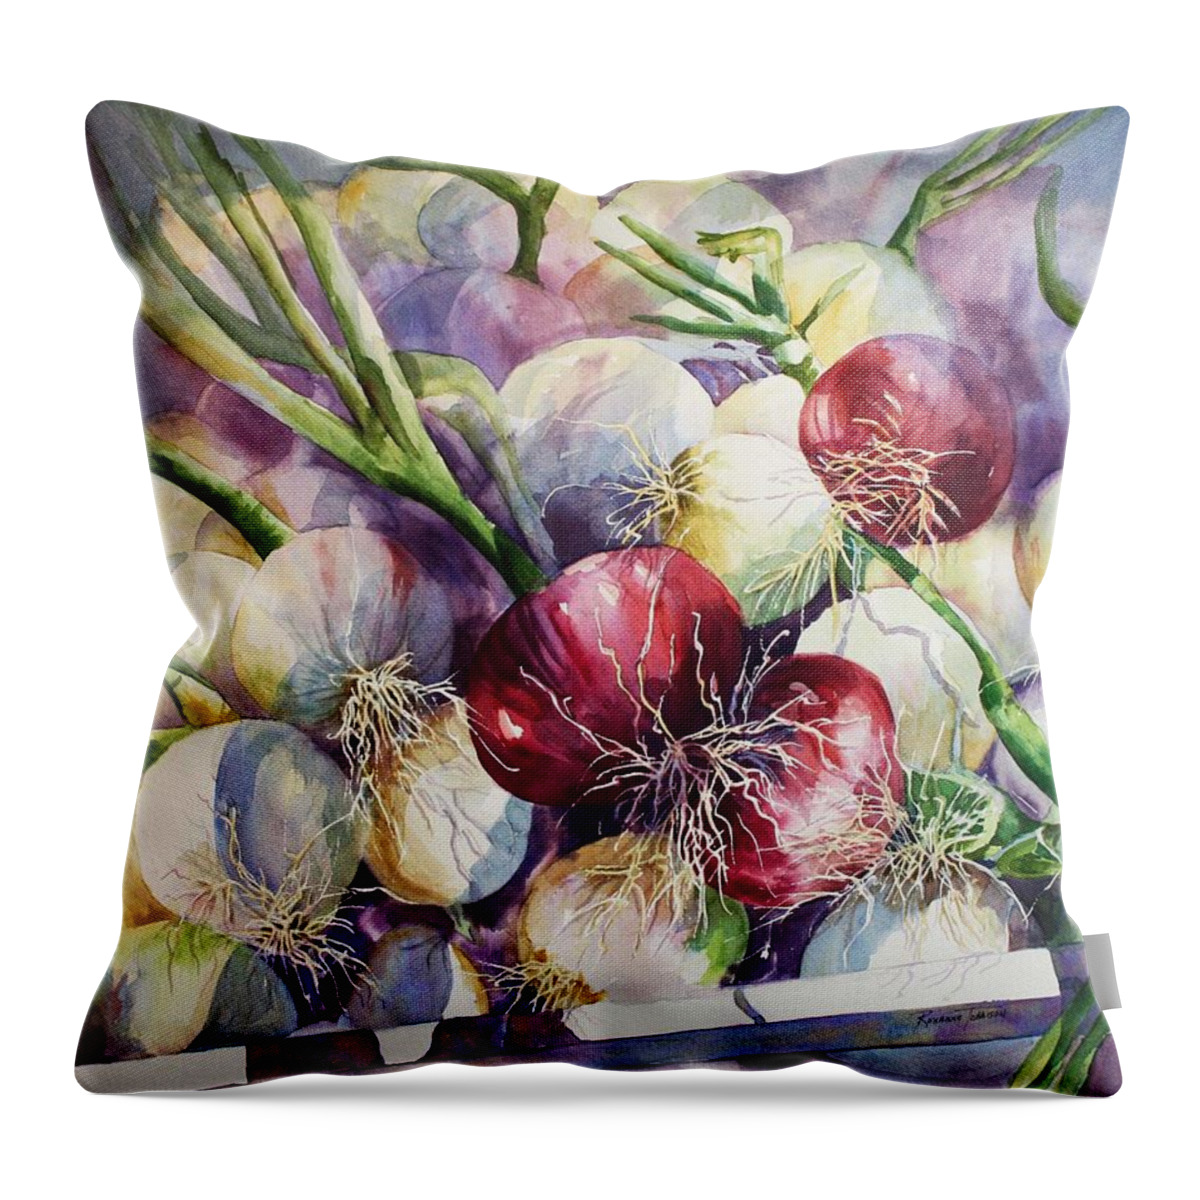 Onions Throw Pillow featuring the painting Don't Cry for Me by Roxanne Tobaison